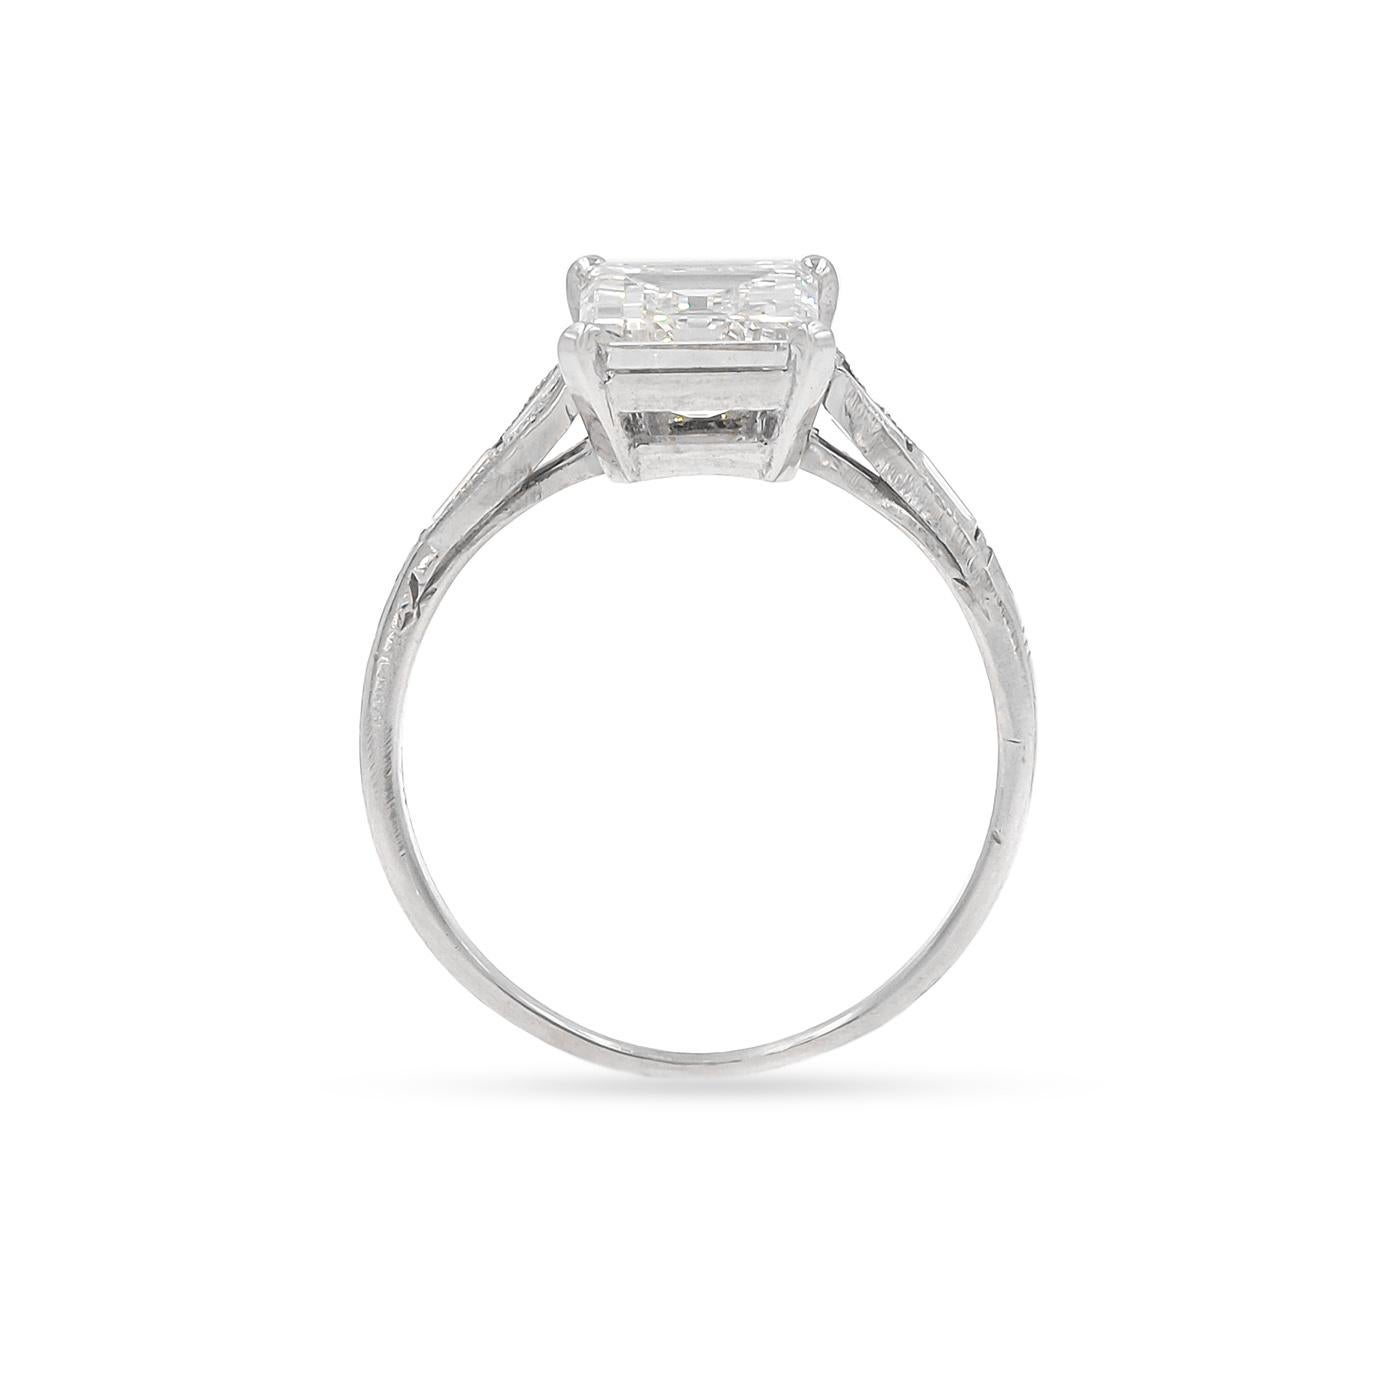 Square Cut Art Deco 1.67 Carat GIA Certified Step Cut Diamond Engagement Ring For Sale